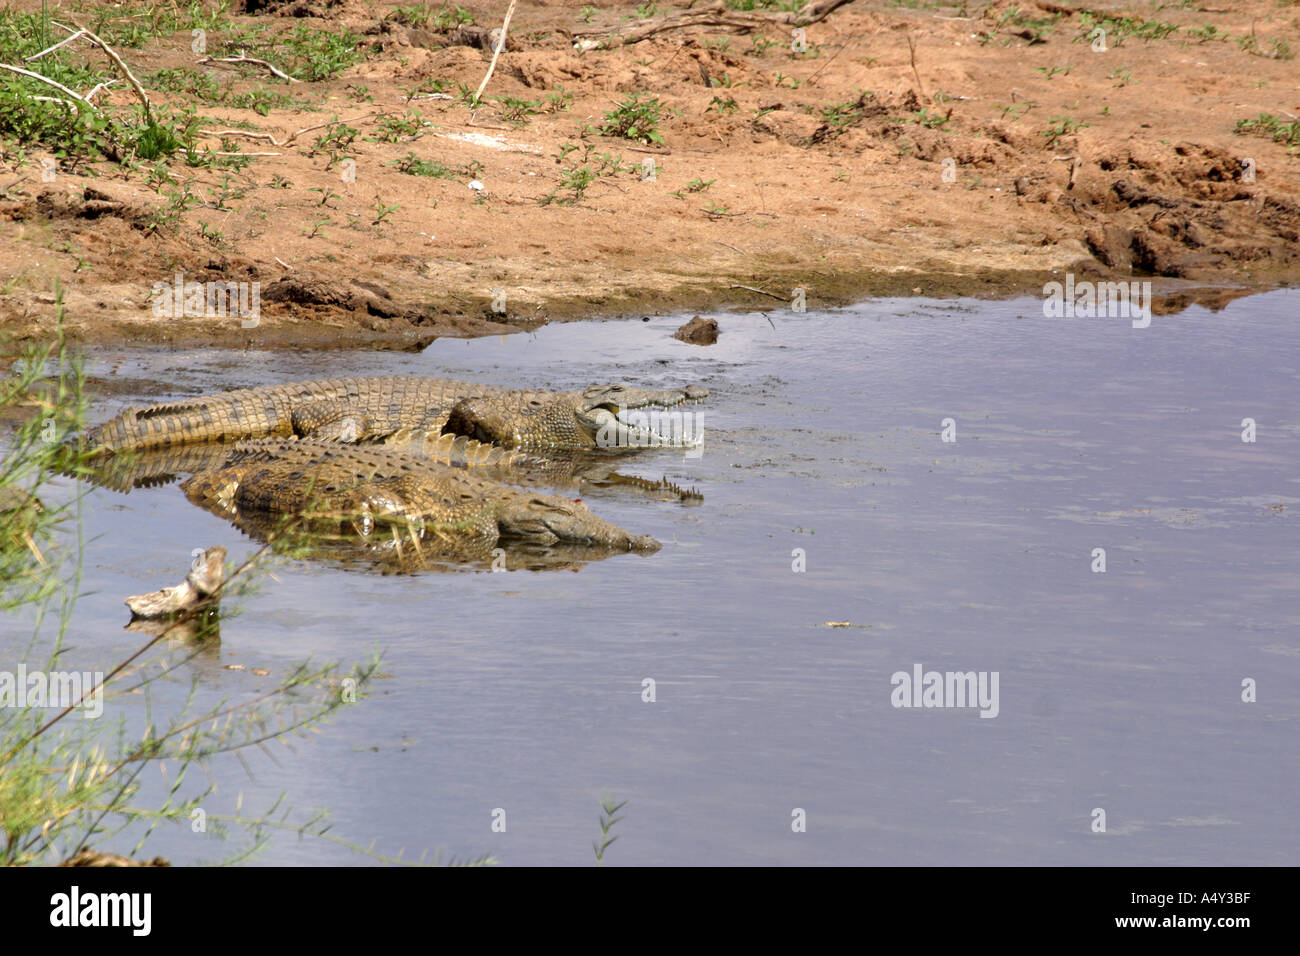 Crocodiles lying in the limpopo river Stock Photo